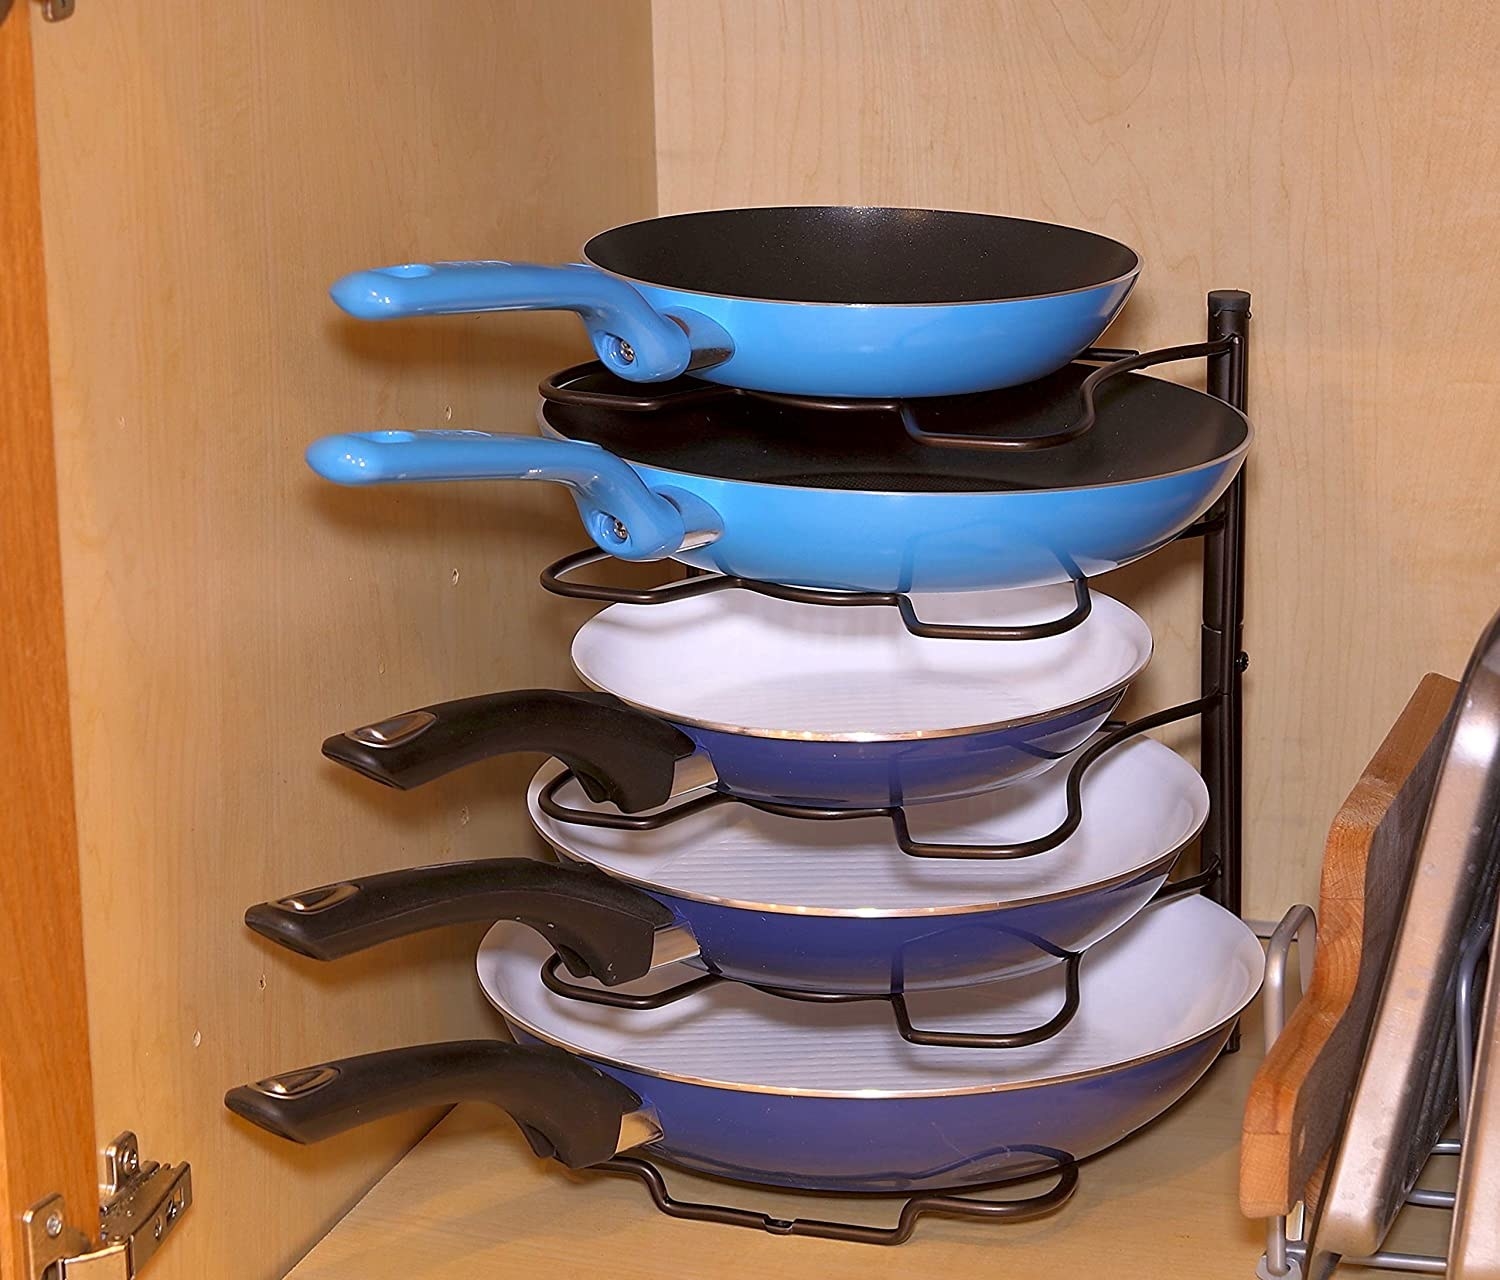 An organizing rack in an open cupboard loaded up with frying pans